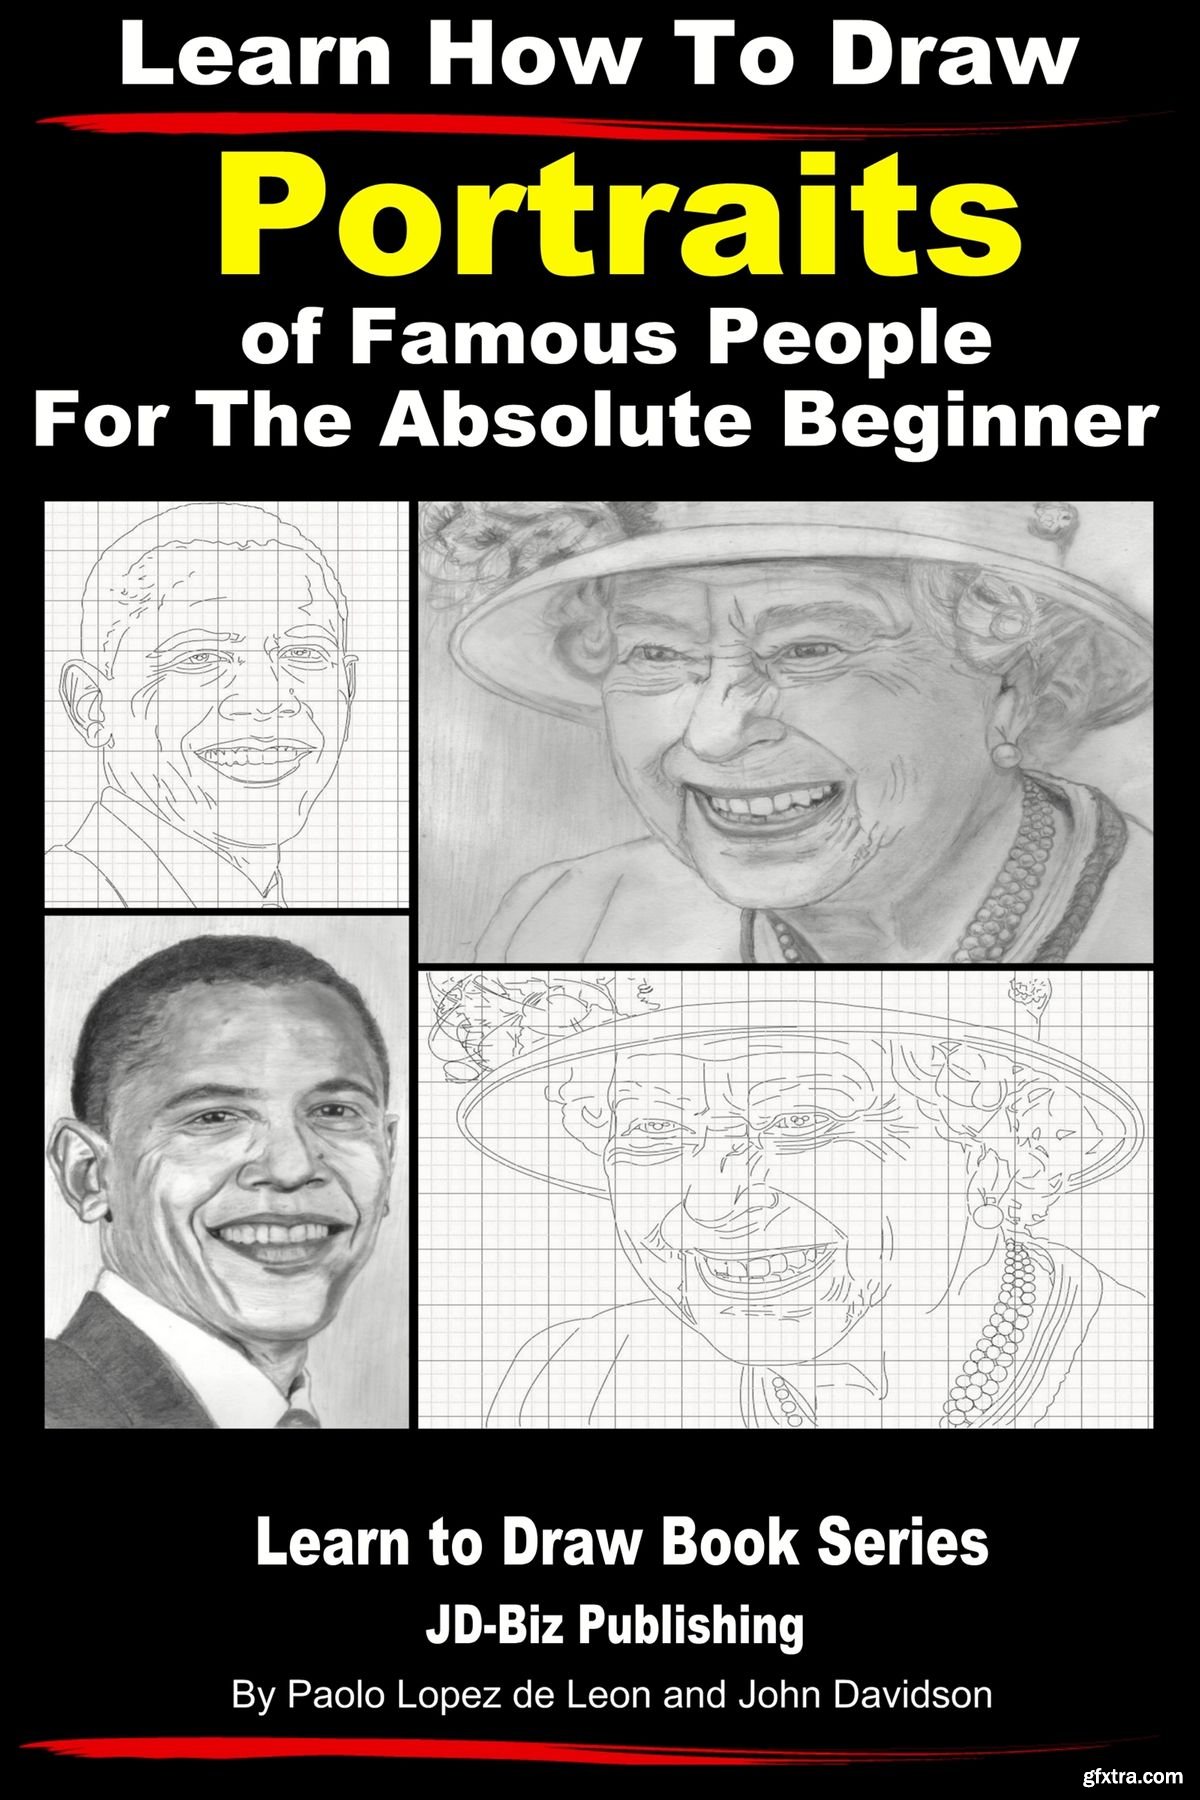 Learn How to Draw Portraits of Famous People in Pencil For the Absolute